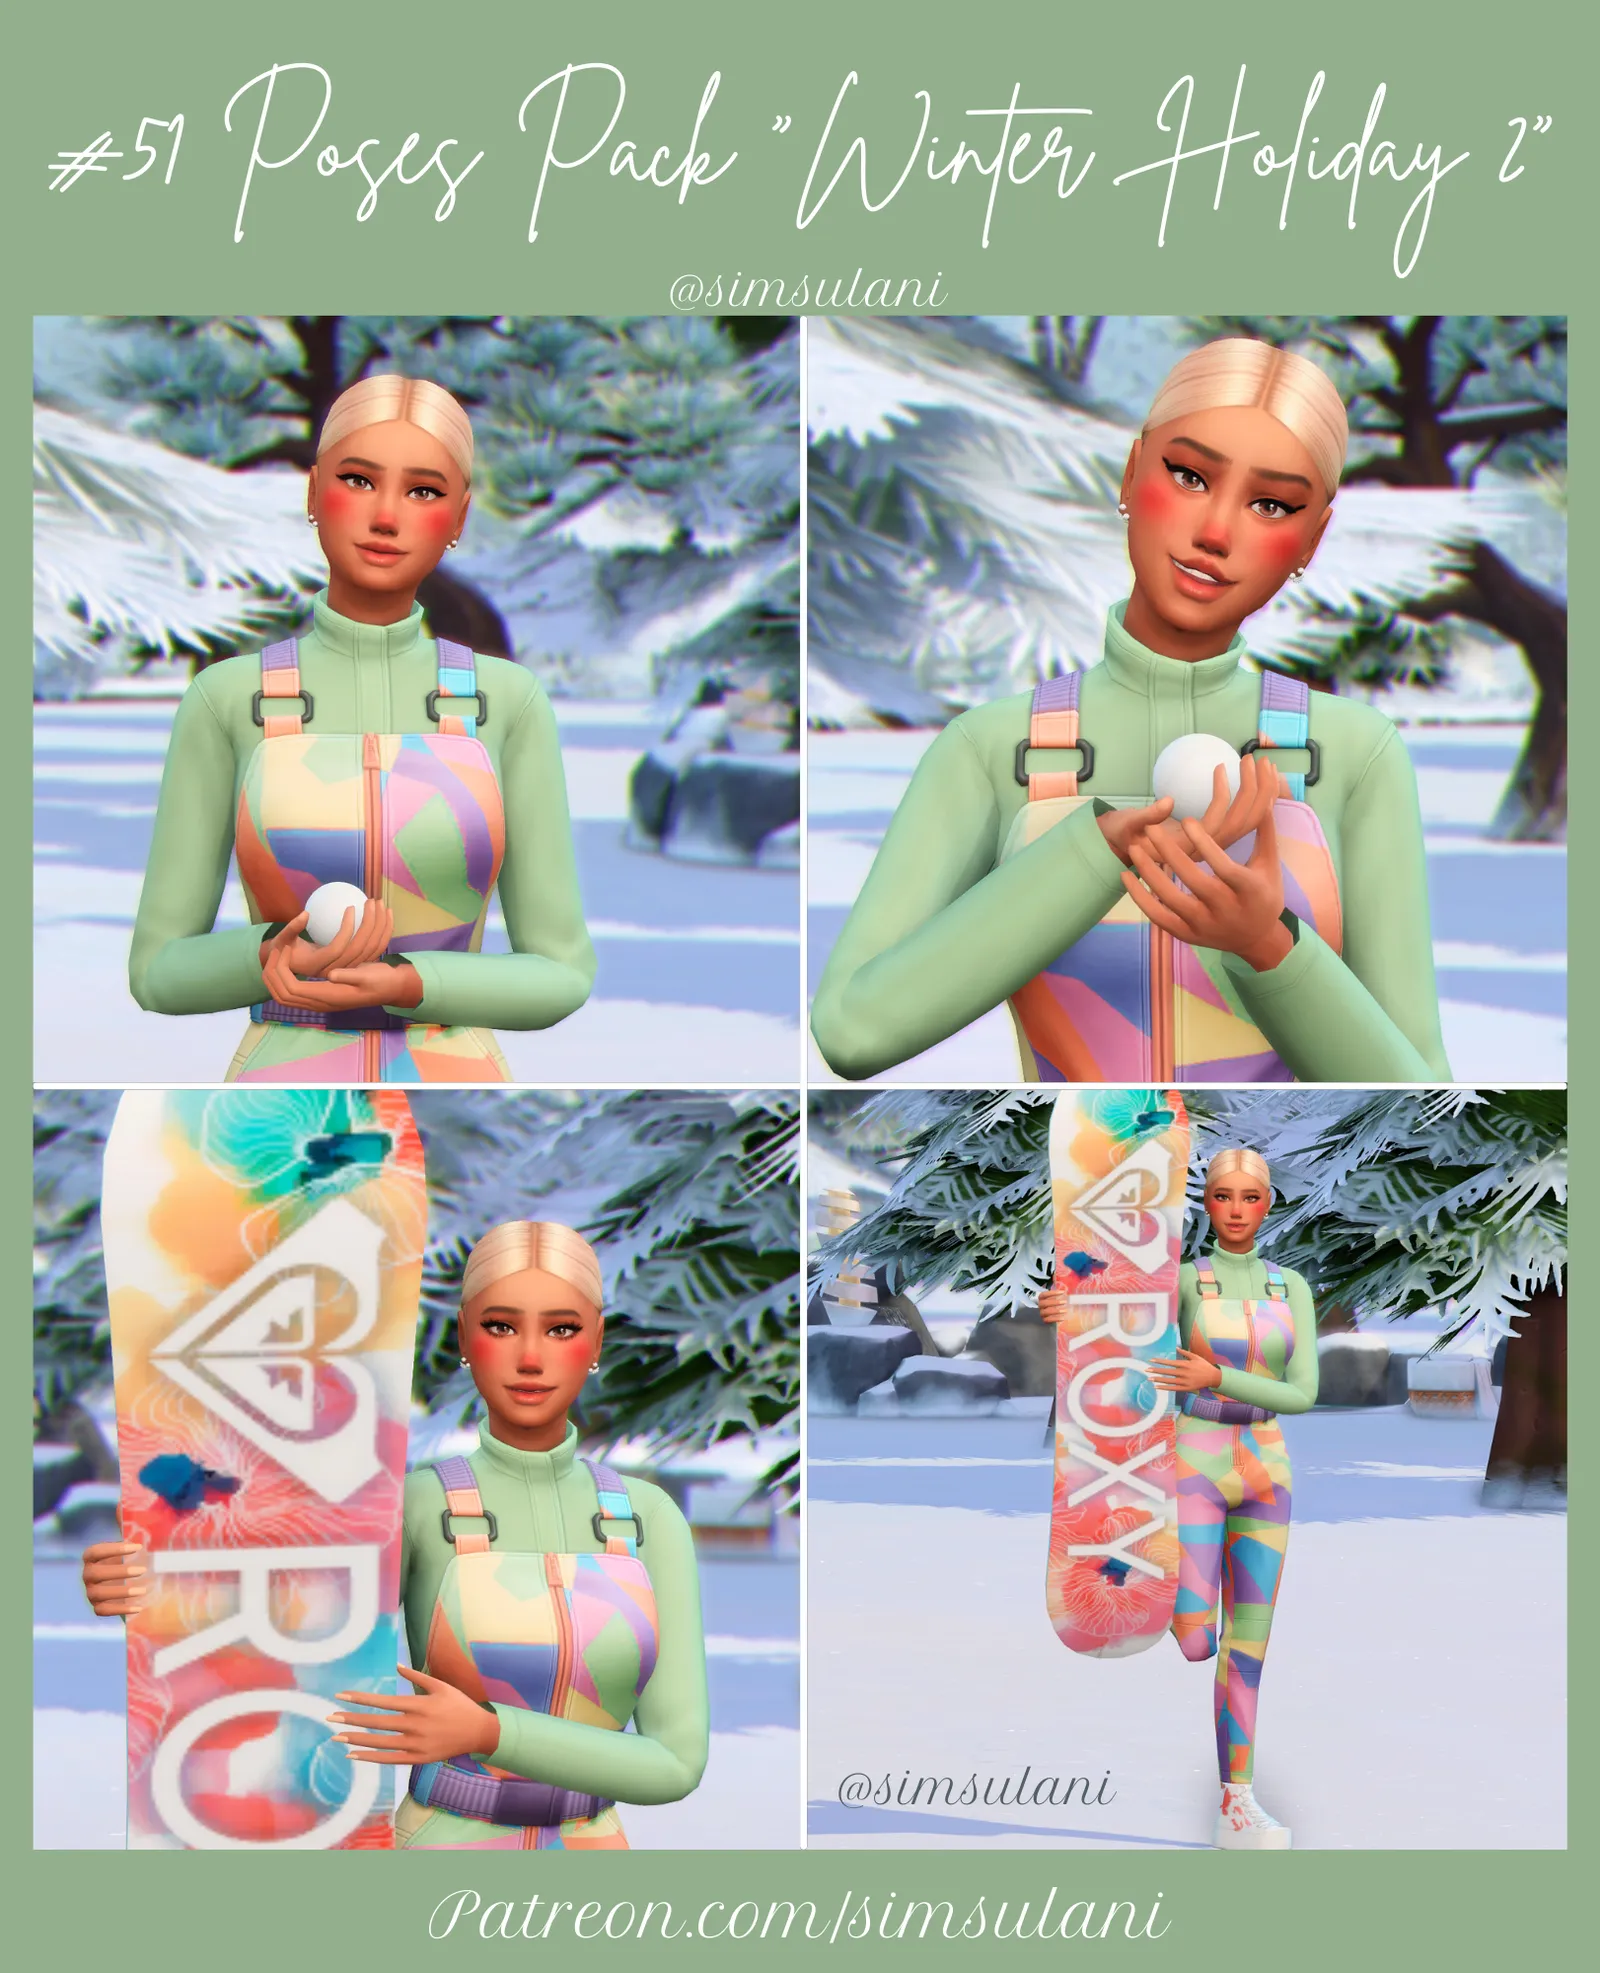 #51 POSES PACK "WINTER HOLIDAY 2" ?